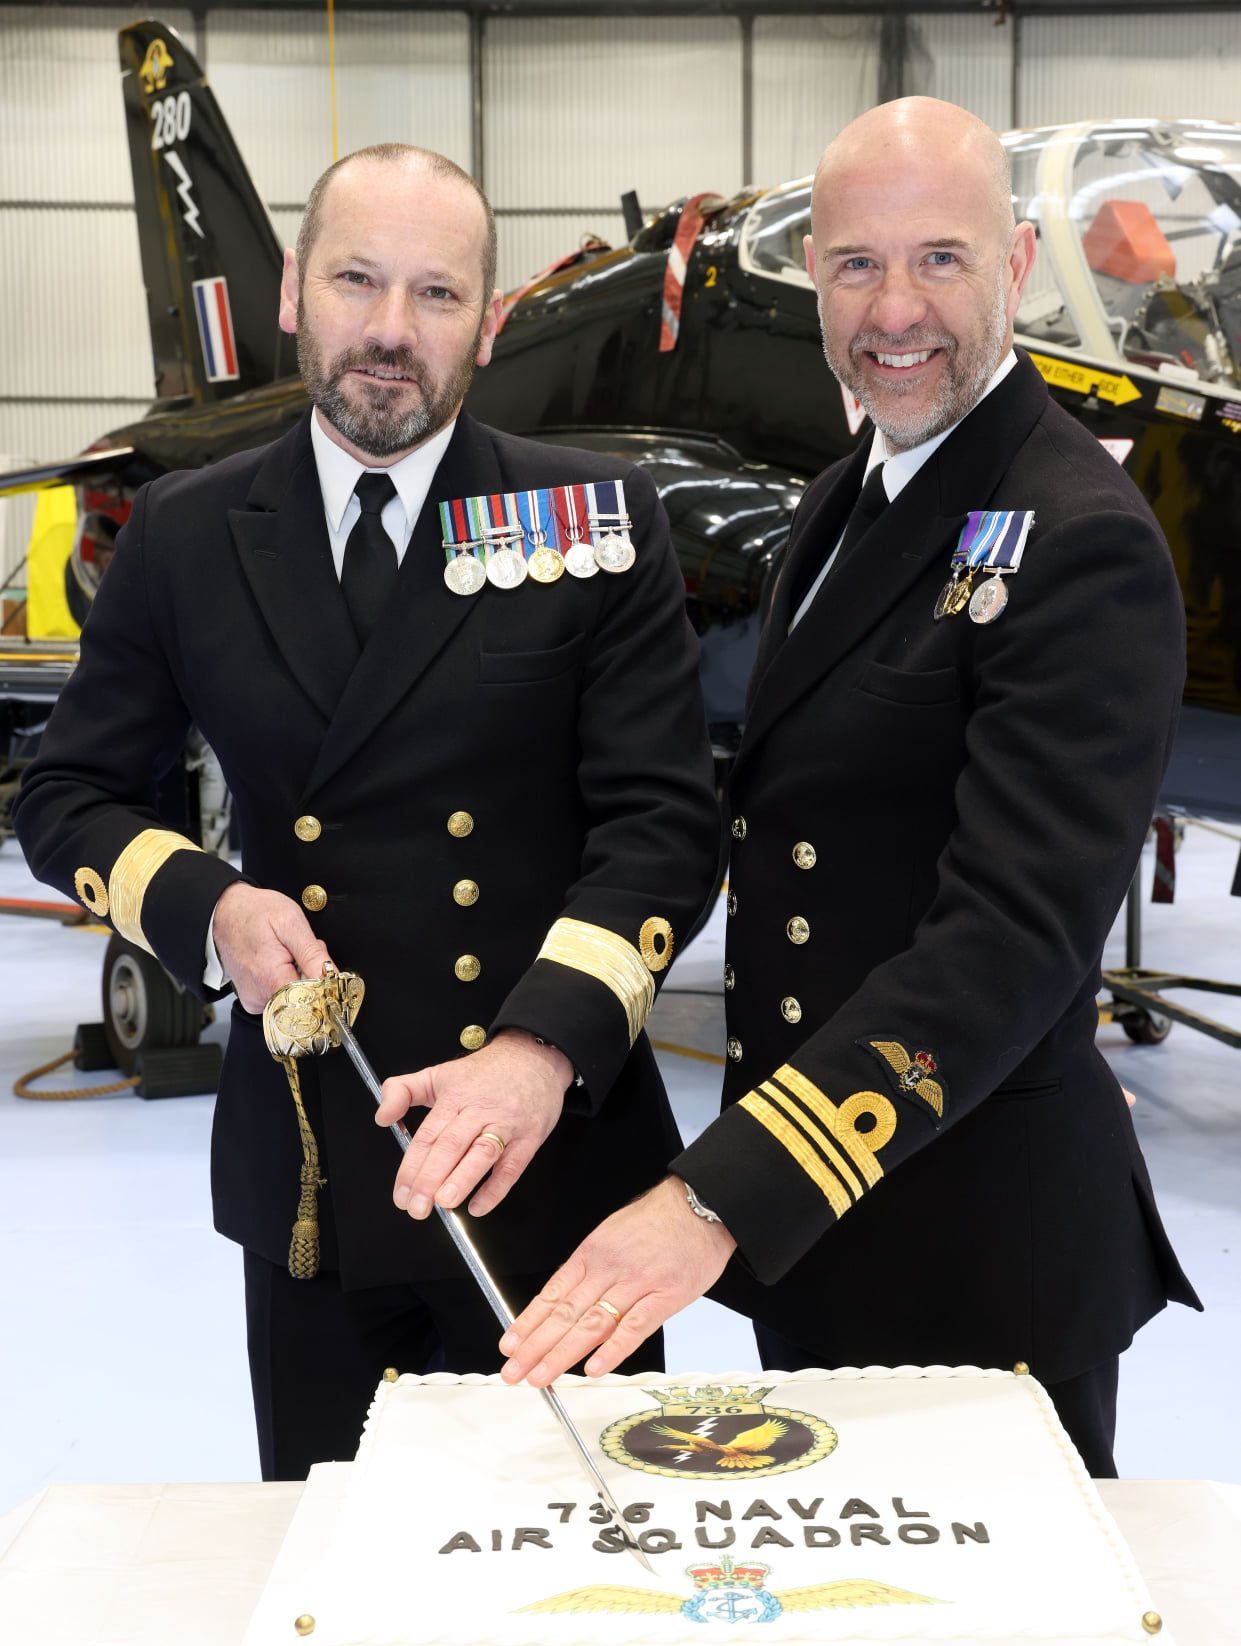 Pictures: Royal Navy/PO A’Barrow